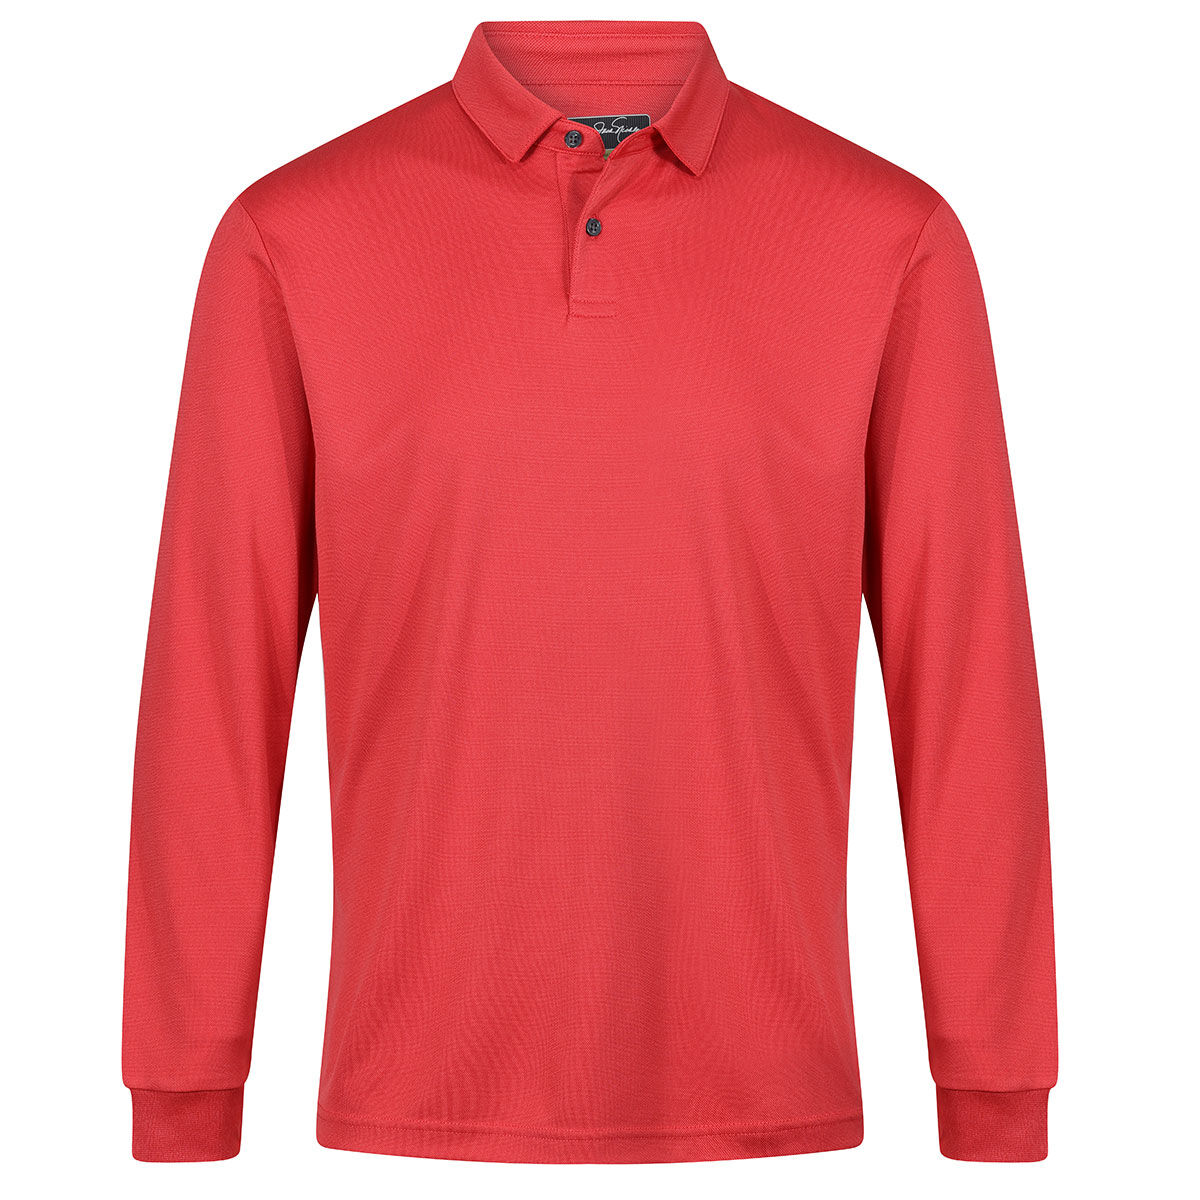 Jack Nicklaus Men’s Classic Long Sleeve Golf Polo Shirt, Mens, Red, Small | American Golf